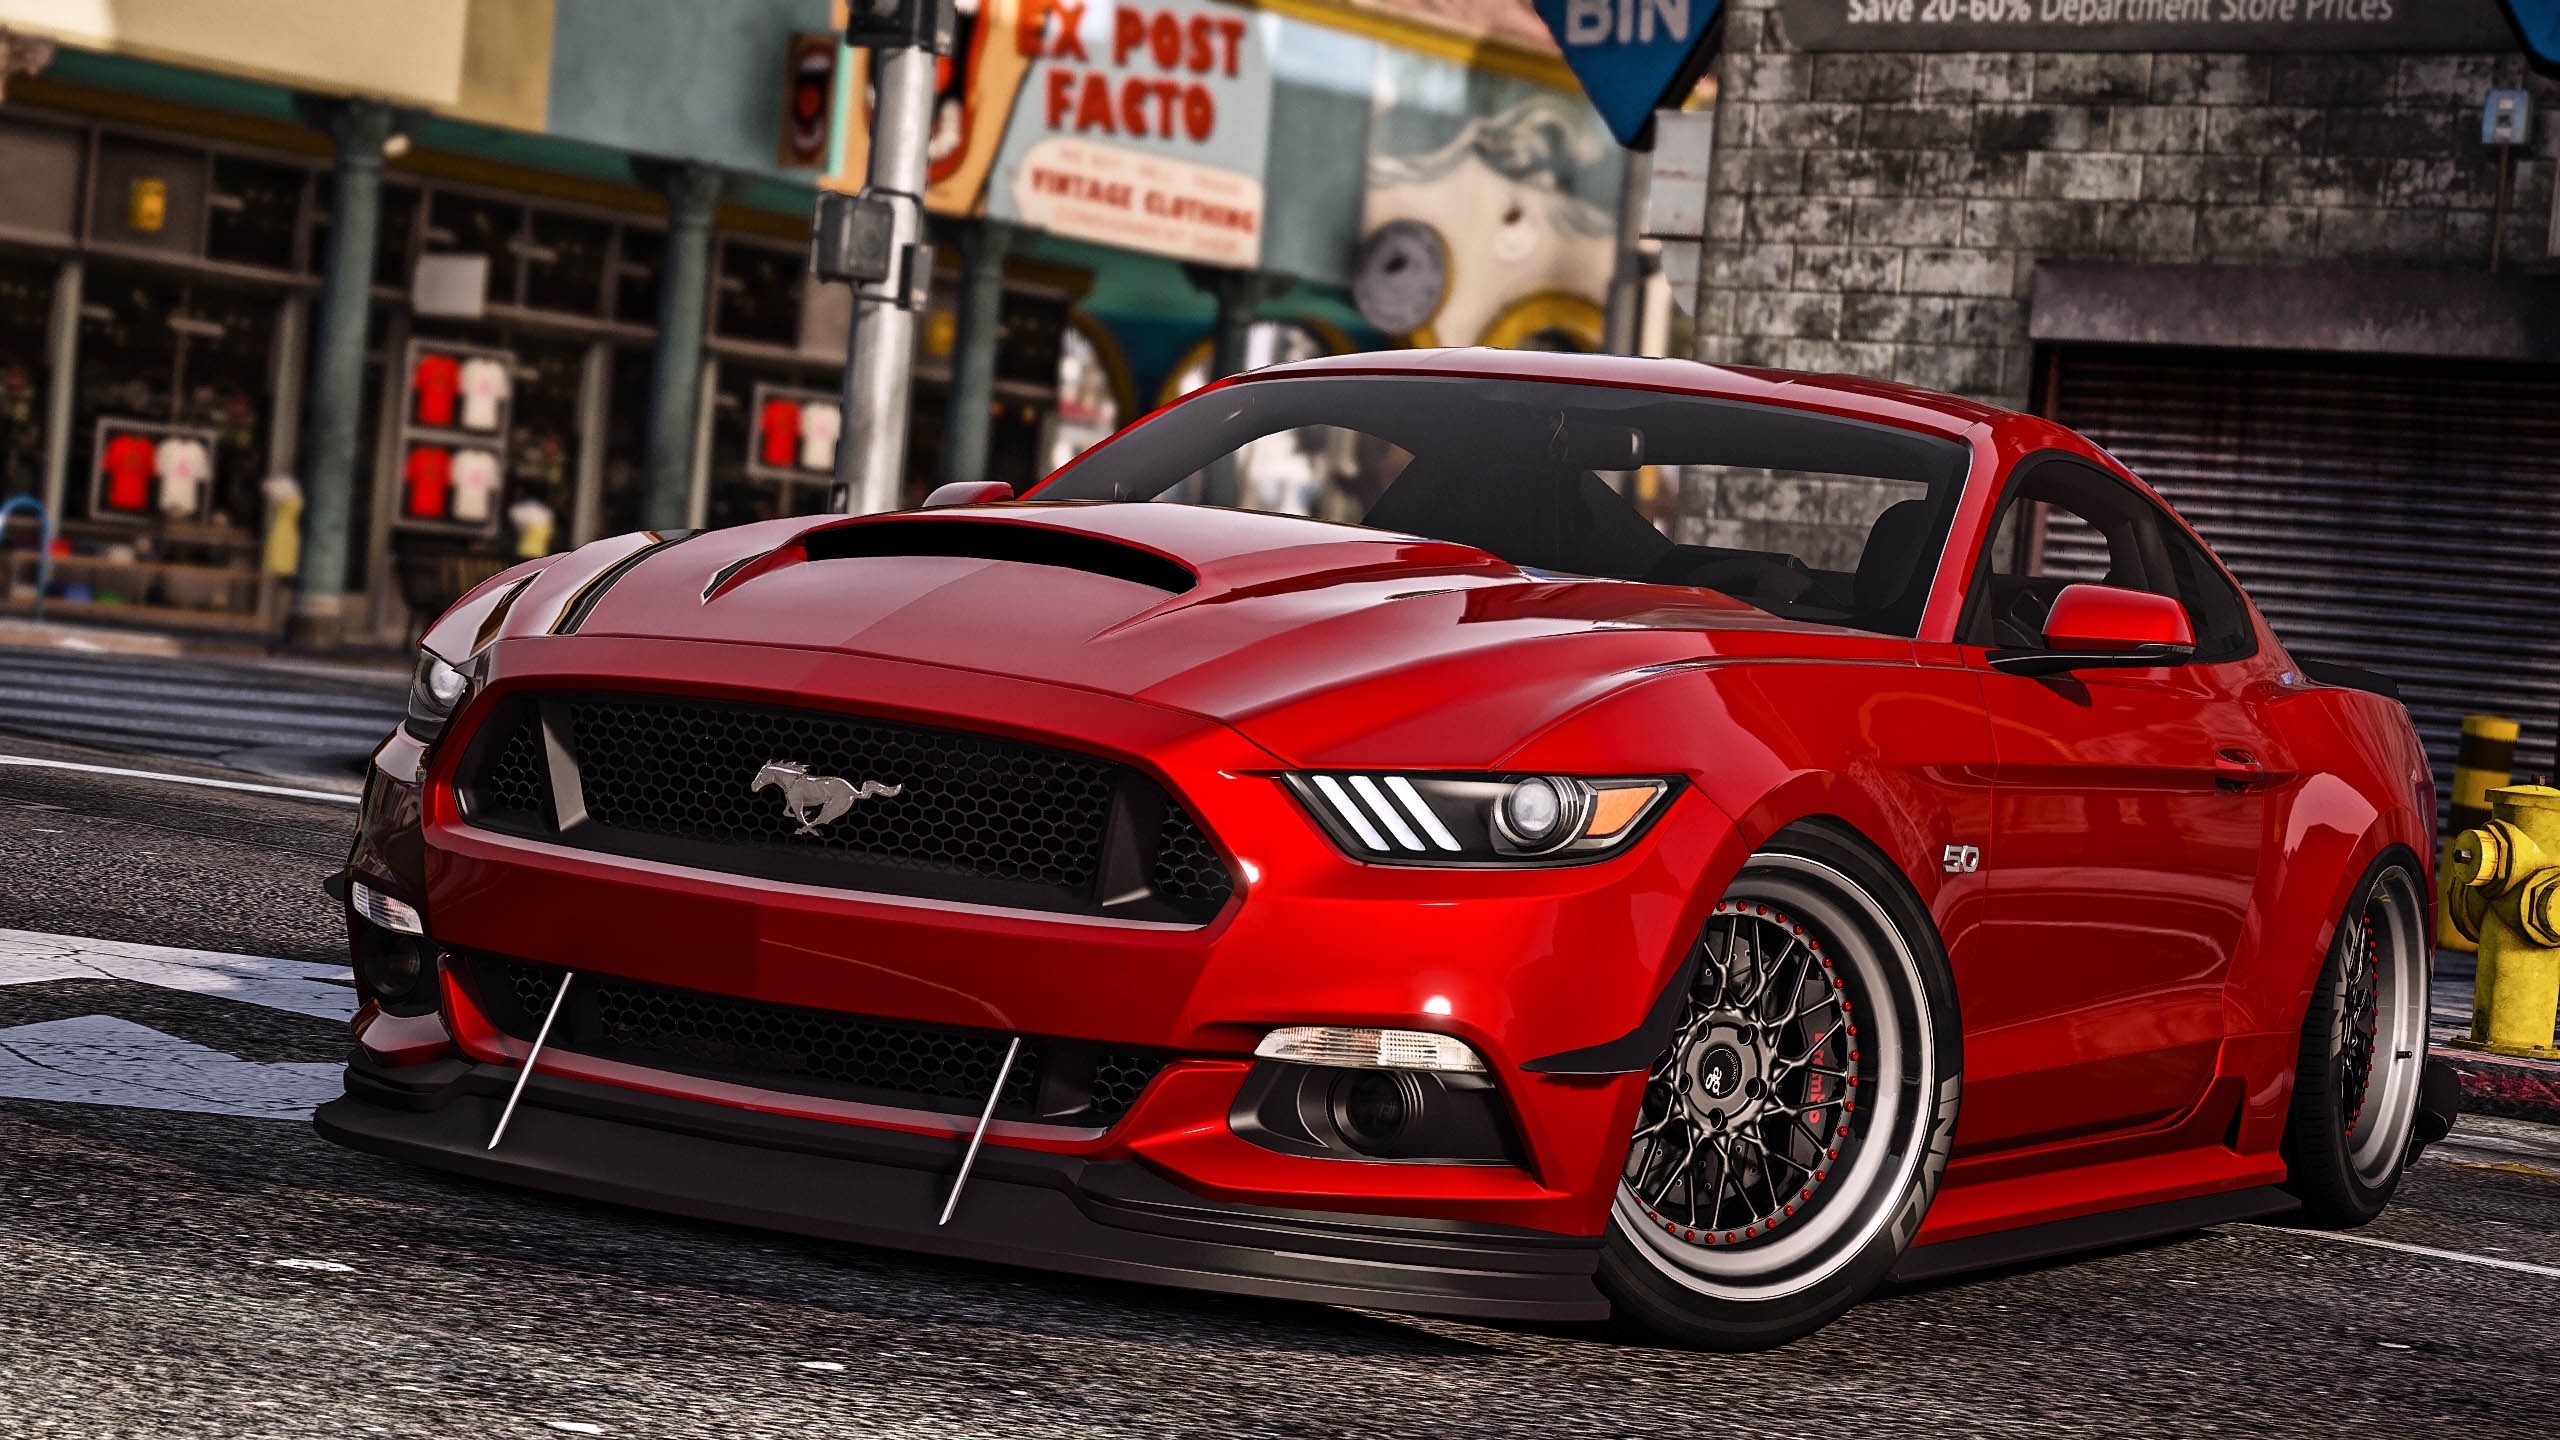 Ford mustang HD wallpapers free download